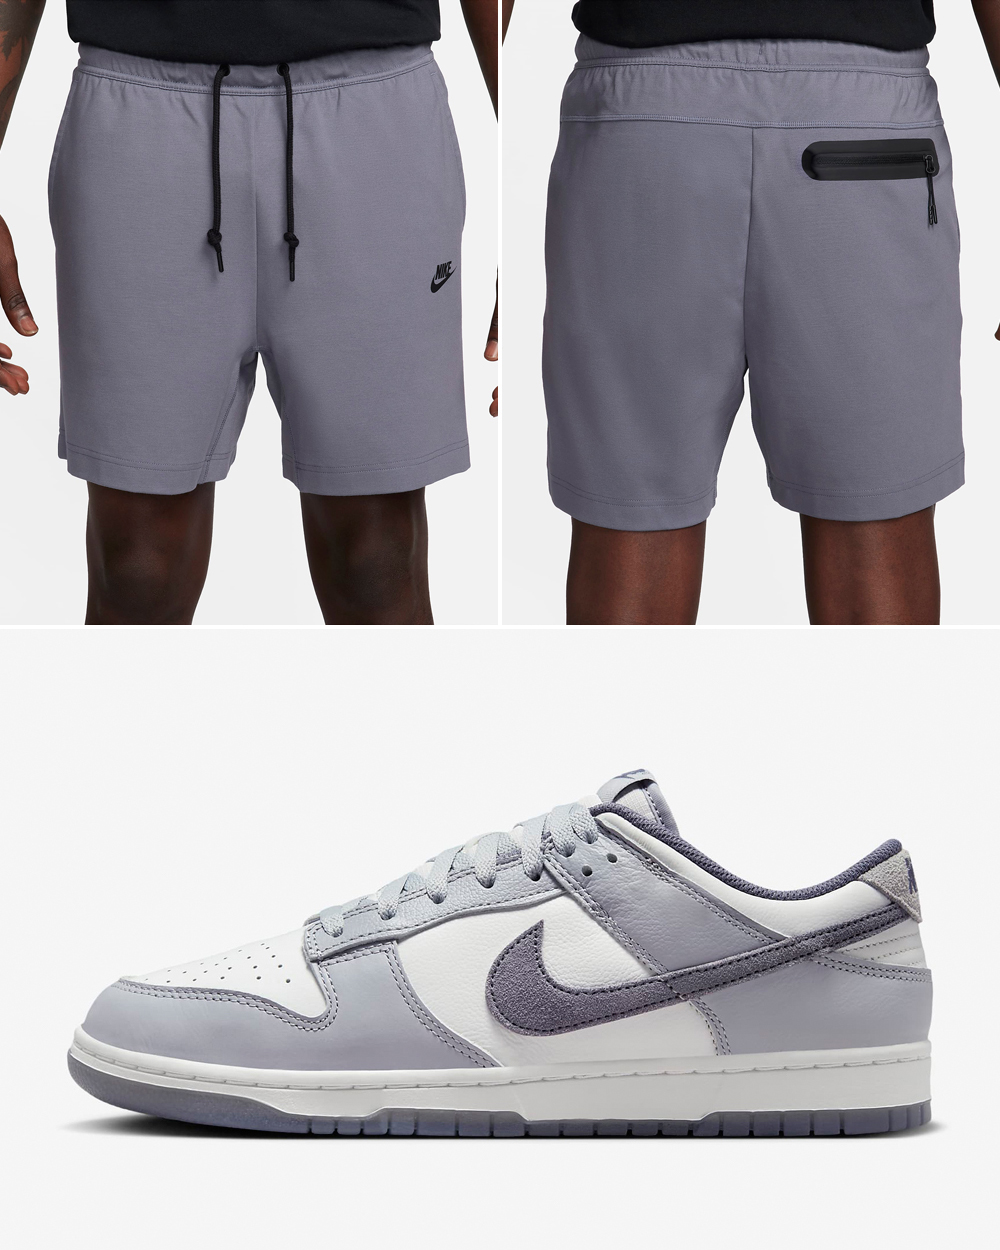 Nike-Dunk-Low-Light-Carbon-Shorts-Outfit